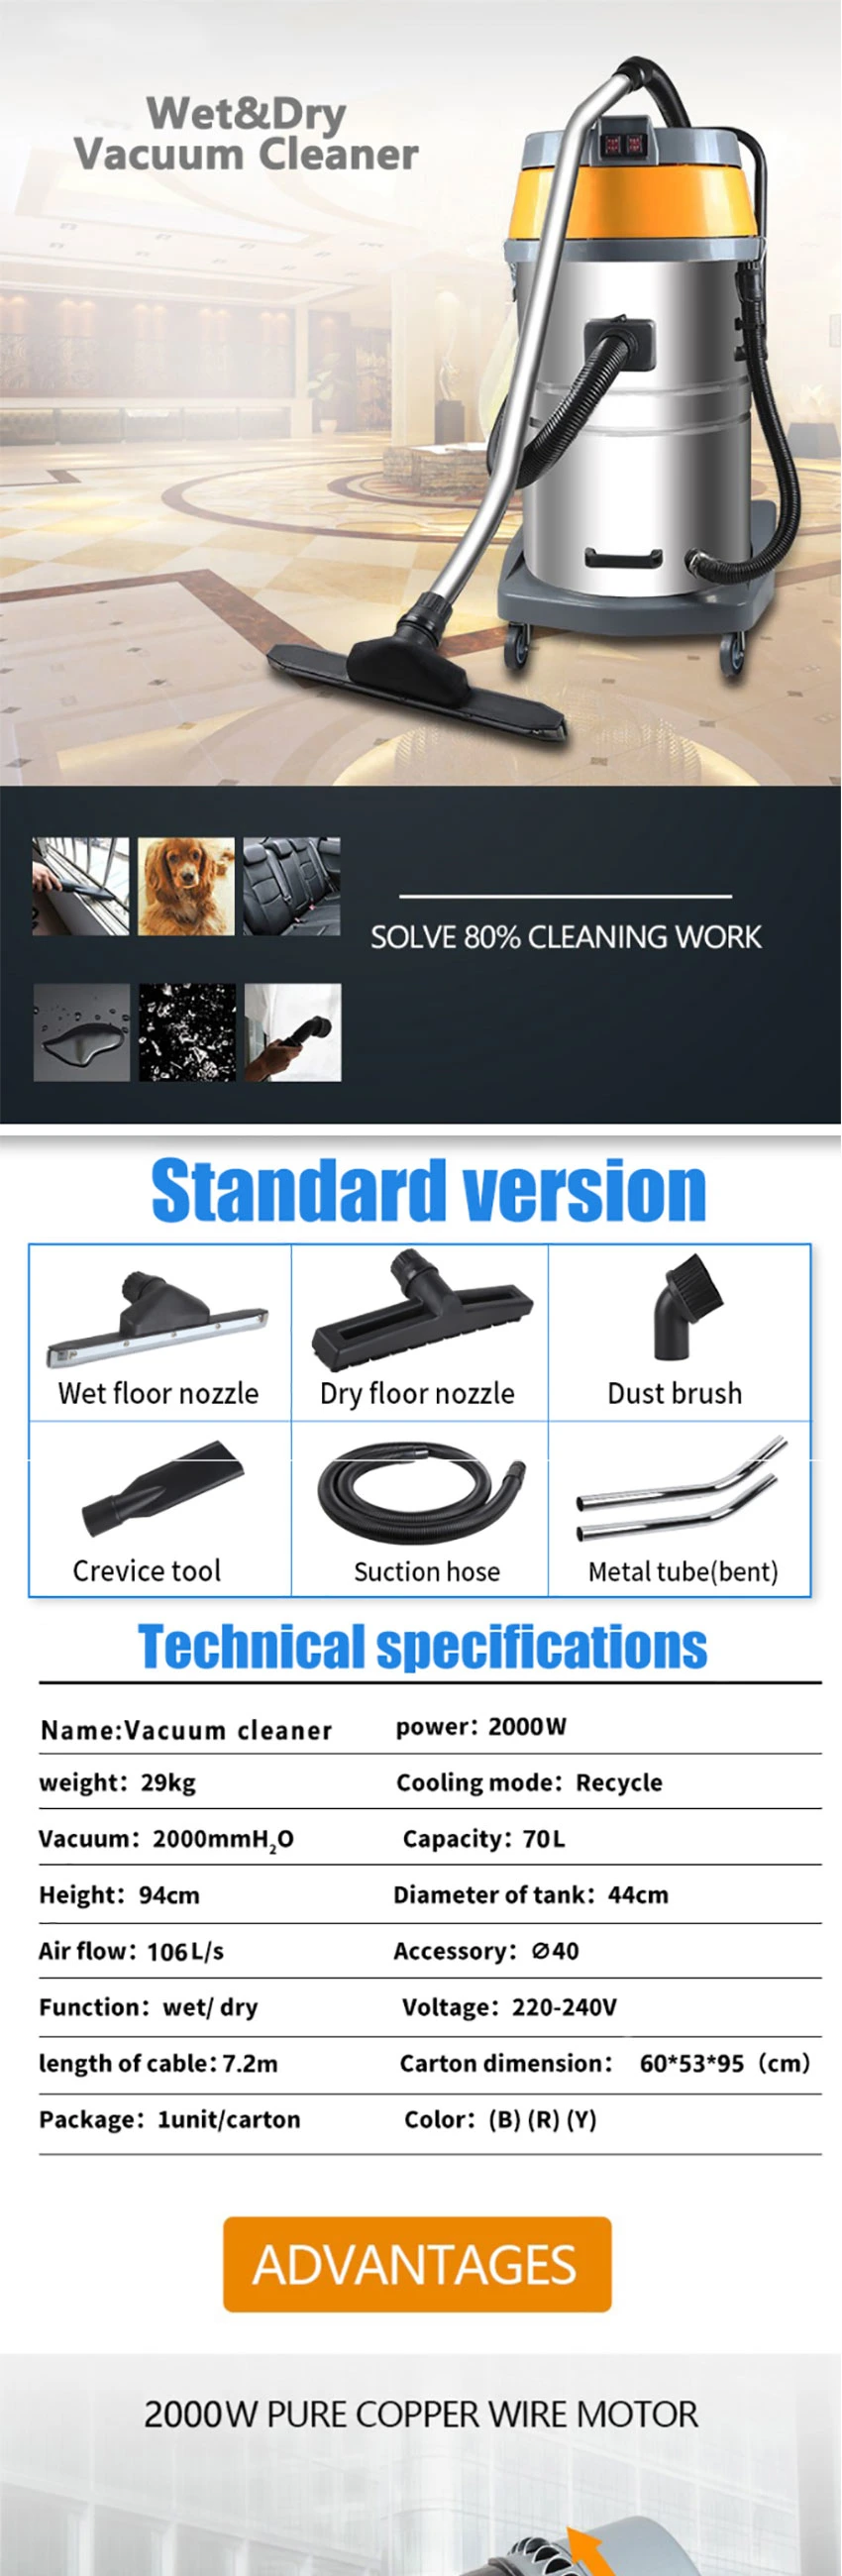 Stainless Steel Wet and Dry 70L Vacuum Cleaner Industrial Home Car Hoter Washer Vacuum Cleaner